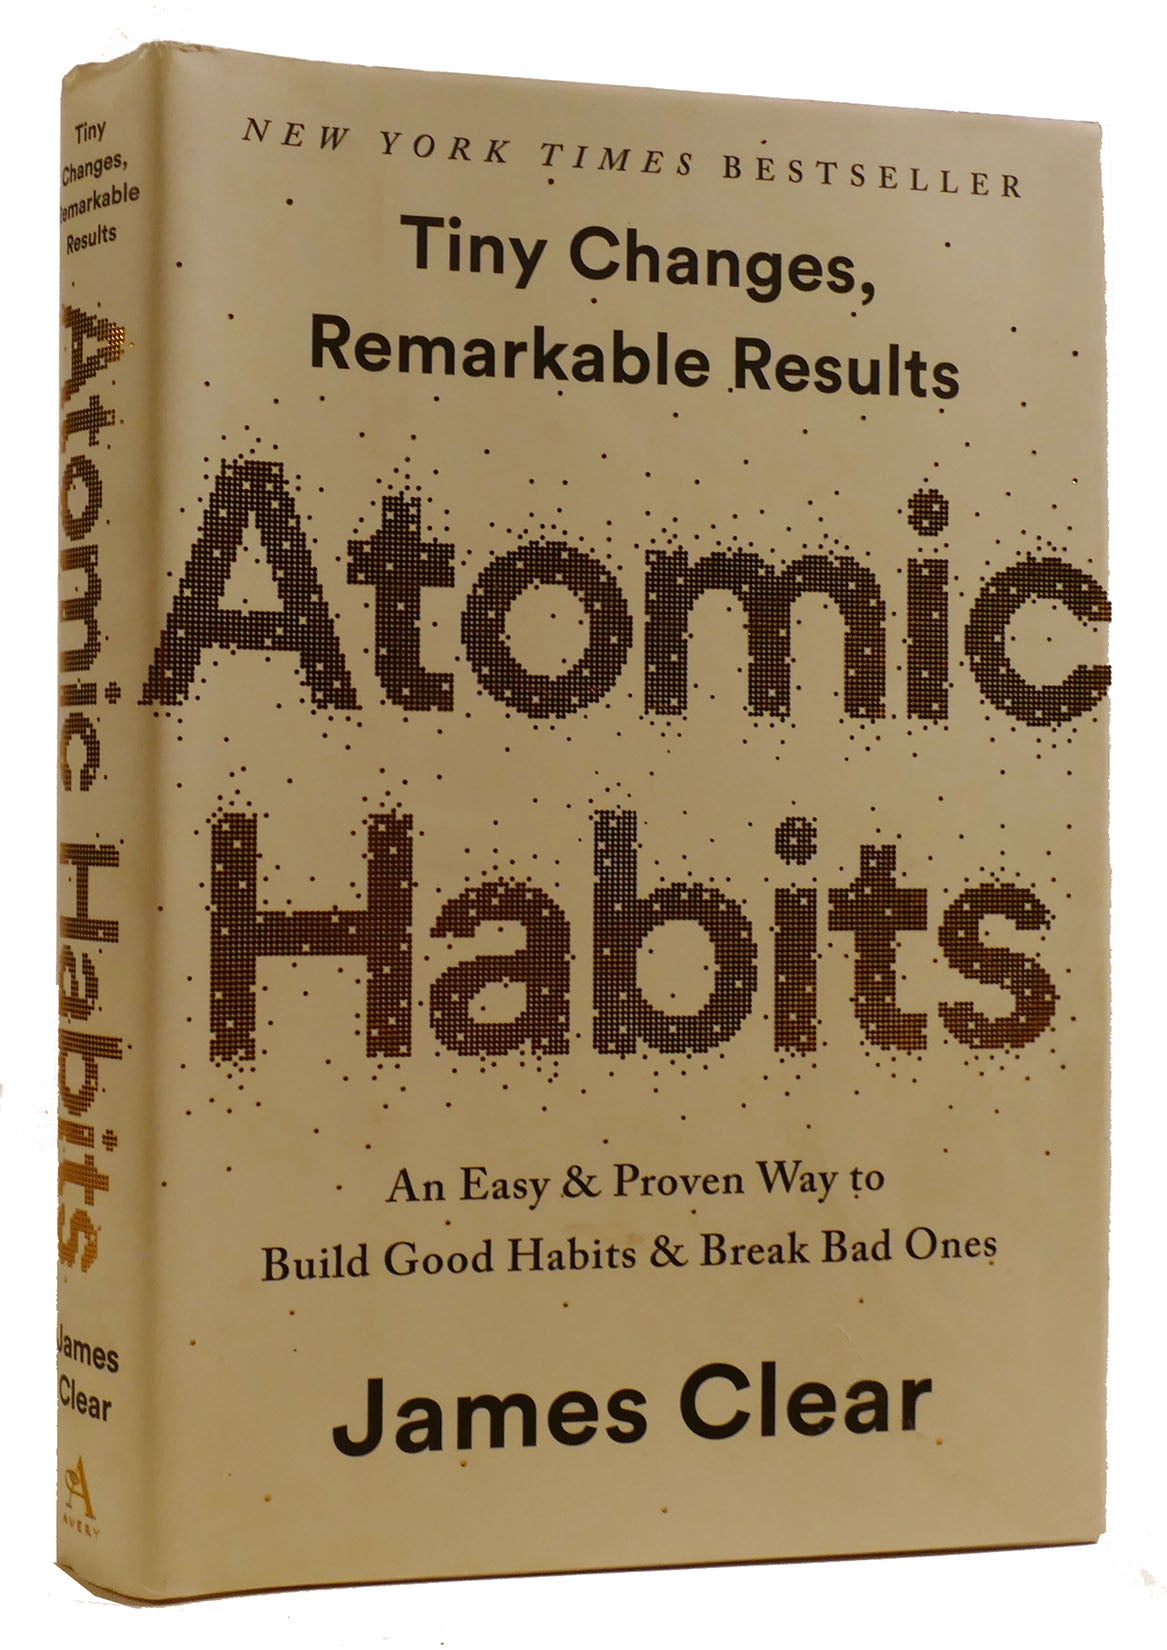 ATOMIC HABITS: AN EASY & PROVEN WAY TO BUILD GOOD HABITS & BREAK BAD ONES  Tiny Changes, Remarkable Results, James Clear